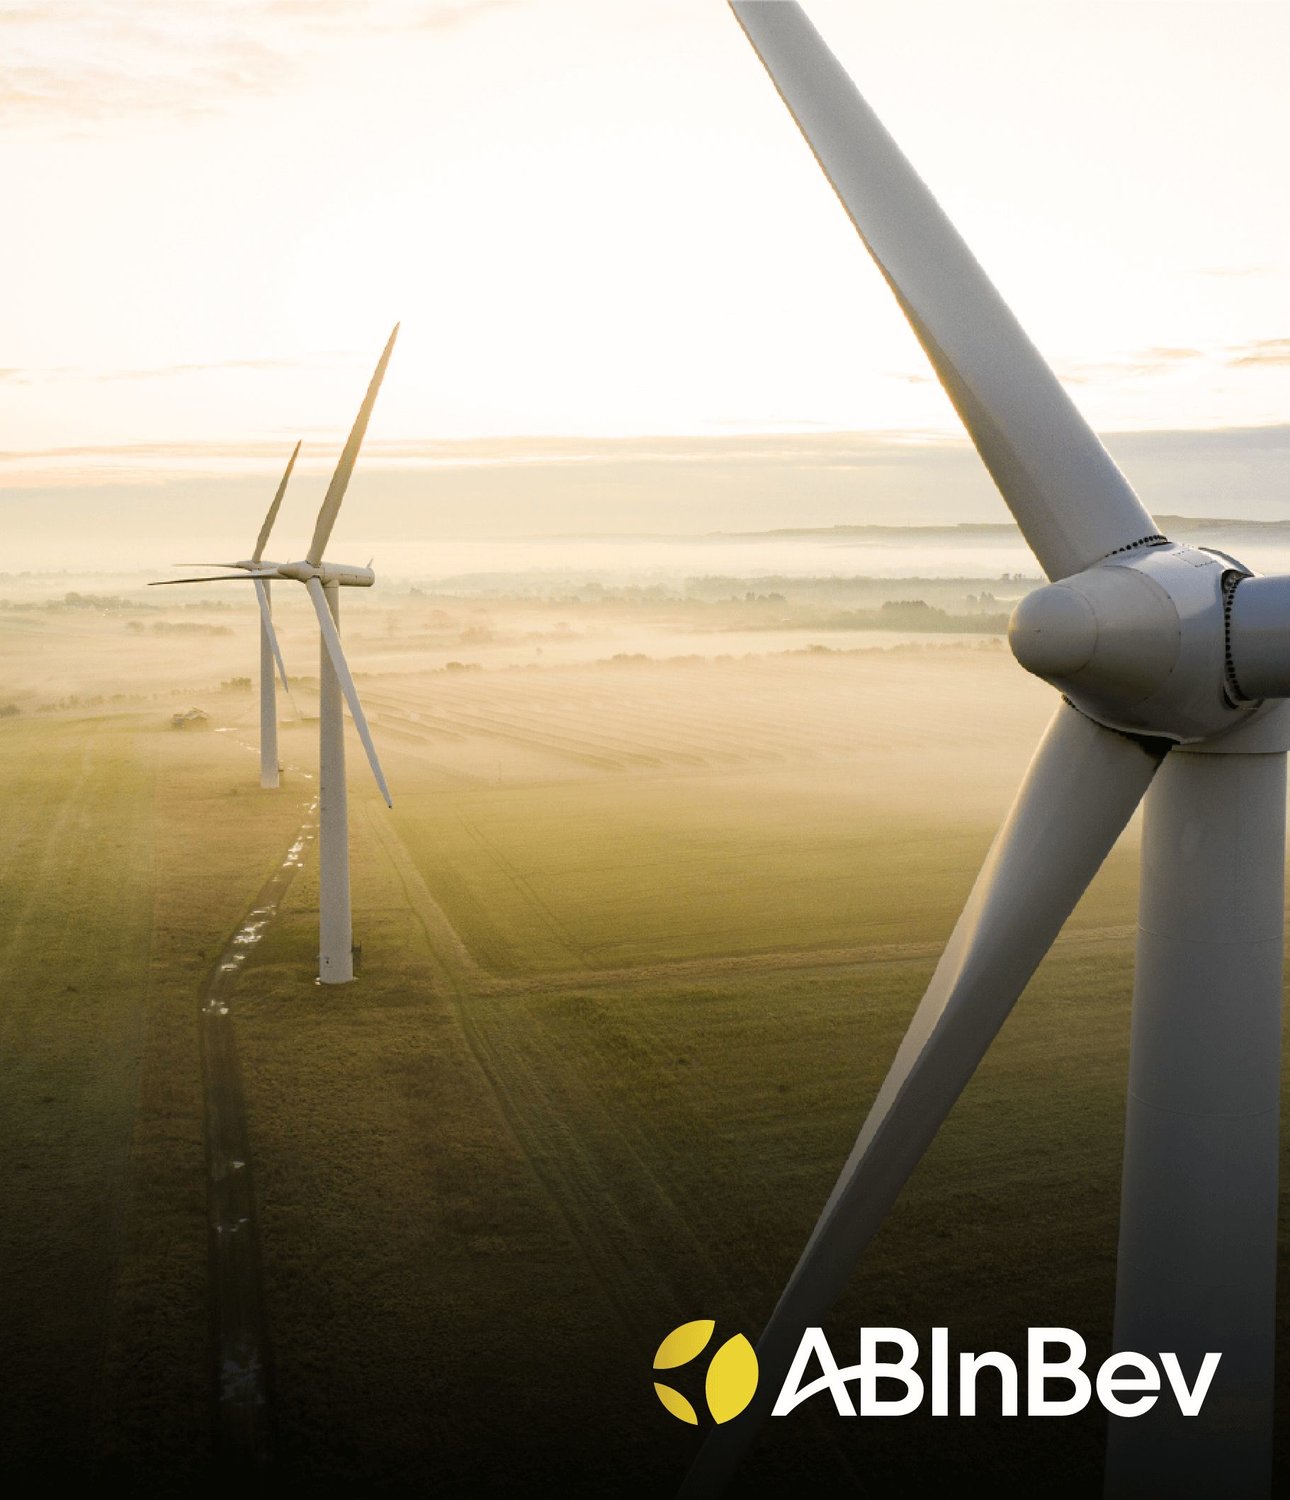 Suppliers are key to developing climate solutions across AB InBev’s value chain: “We go further together than alone.”